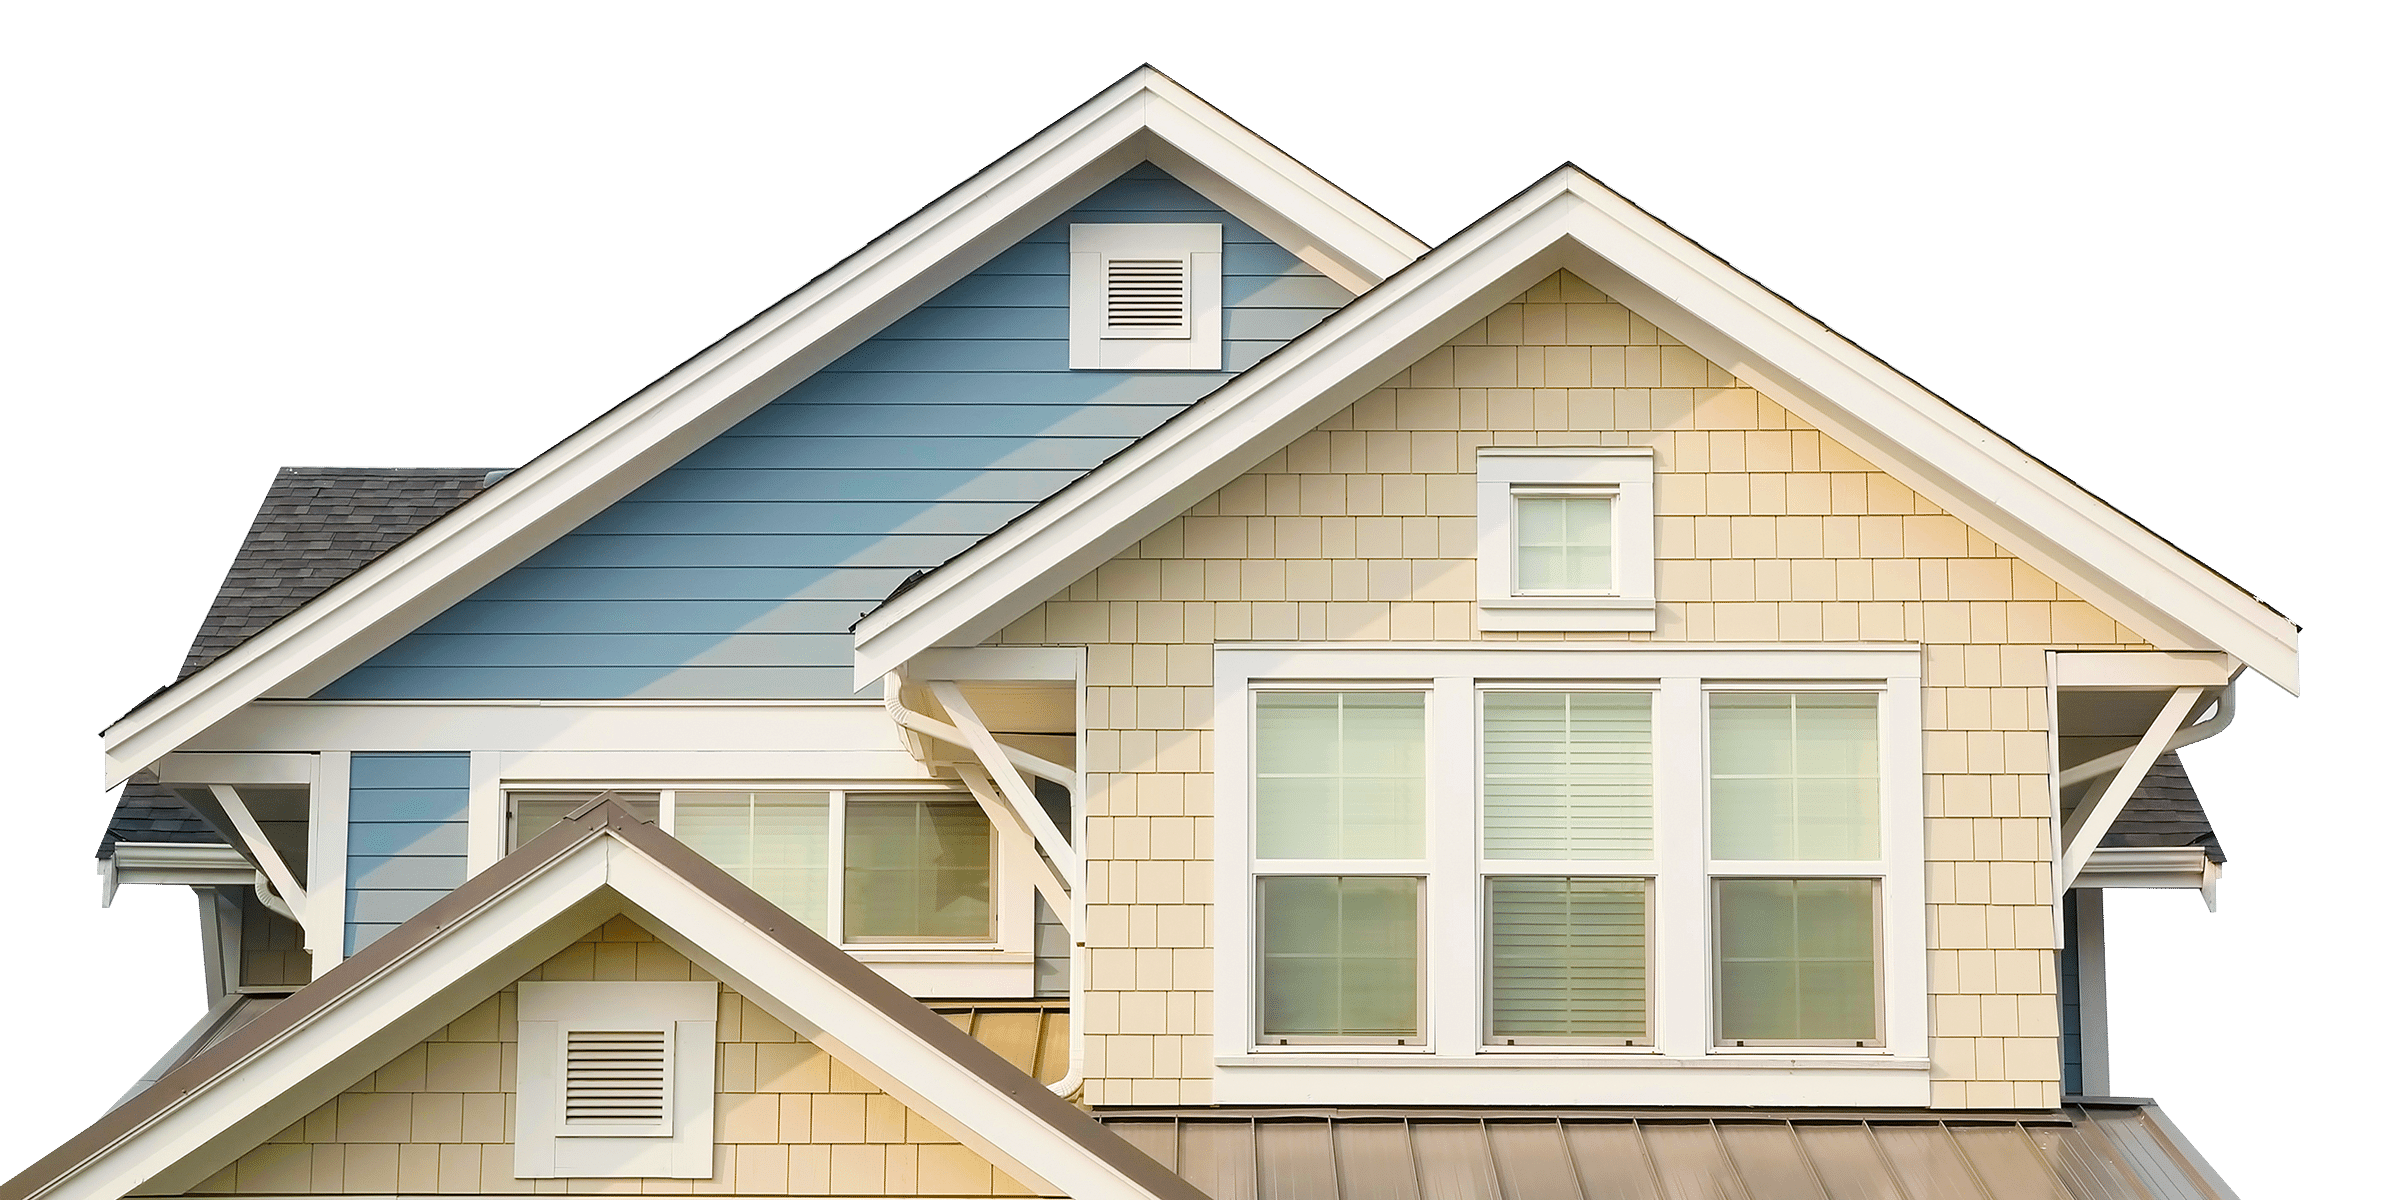 Roof, windows, siding, and gutter repair service by stormguard